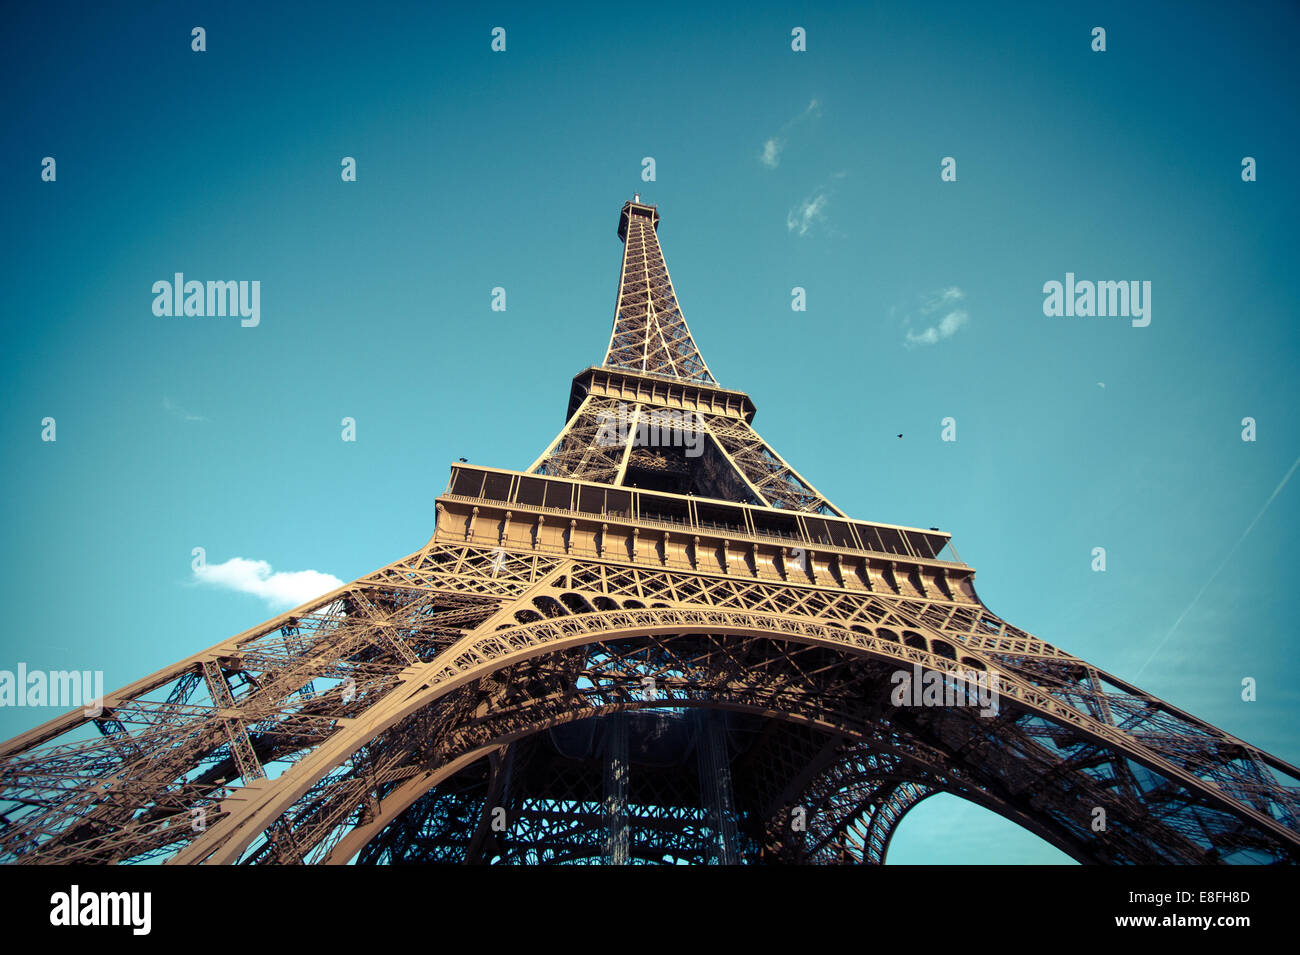 Low-angle view of Eiffel Tower, Paris, France Stock Photo